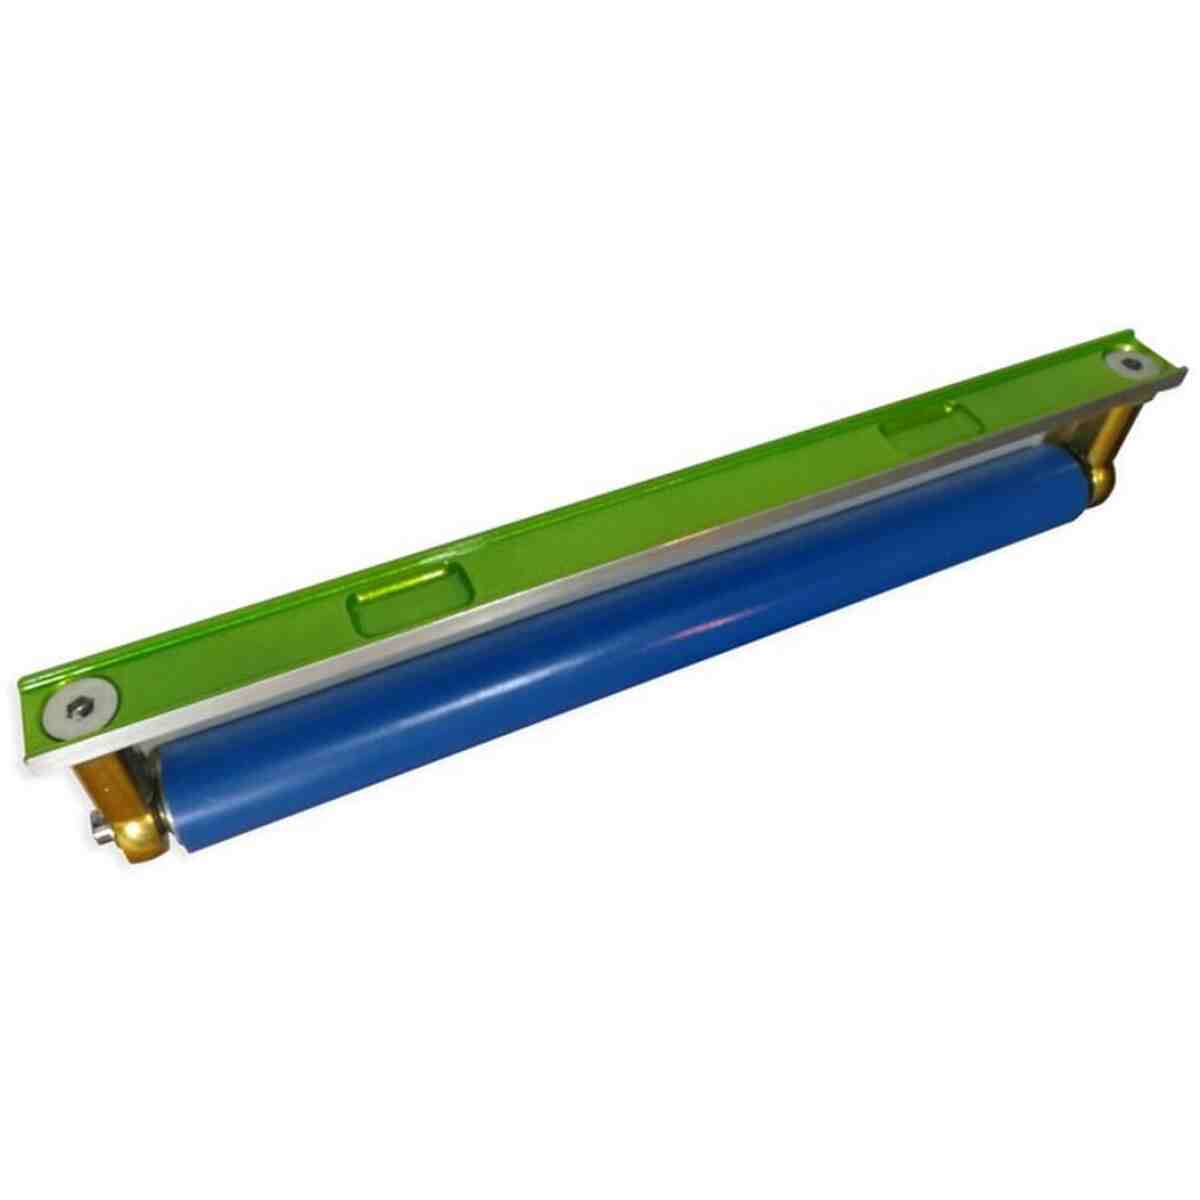 Roller Squeegee 16" (W/ PTFE Sheet) - Bulk 5 Pack ACTION ENGINEERING®